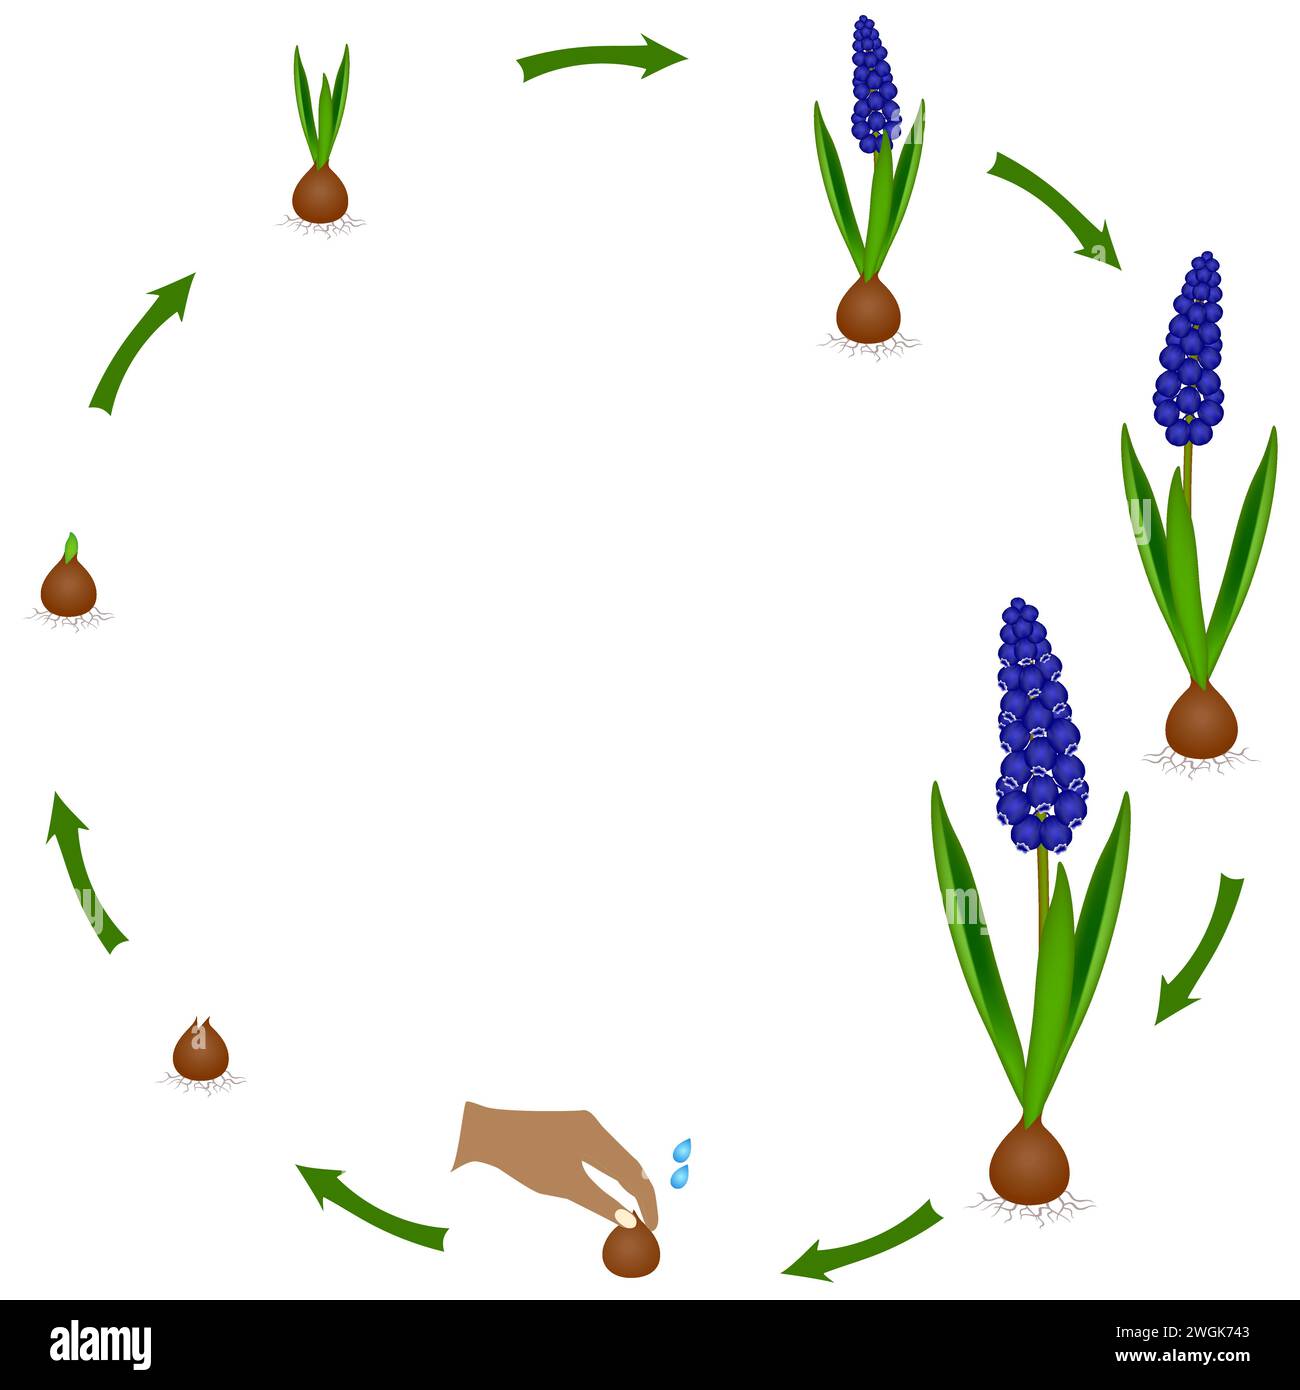 Life cycle of a muscari plant on a white background. Stock Vector